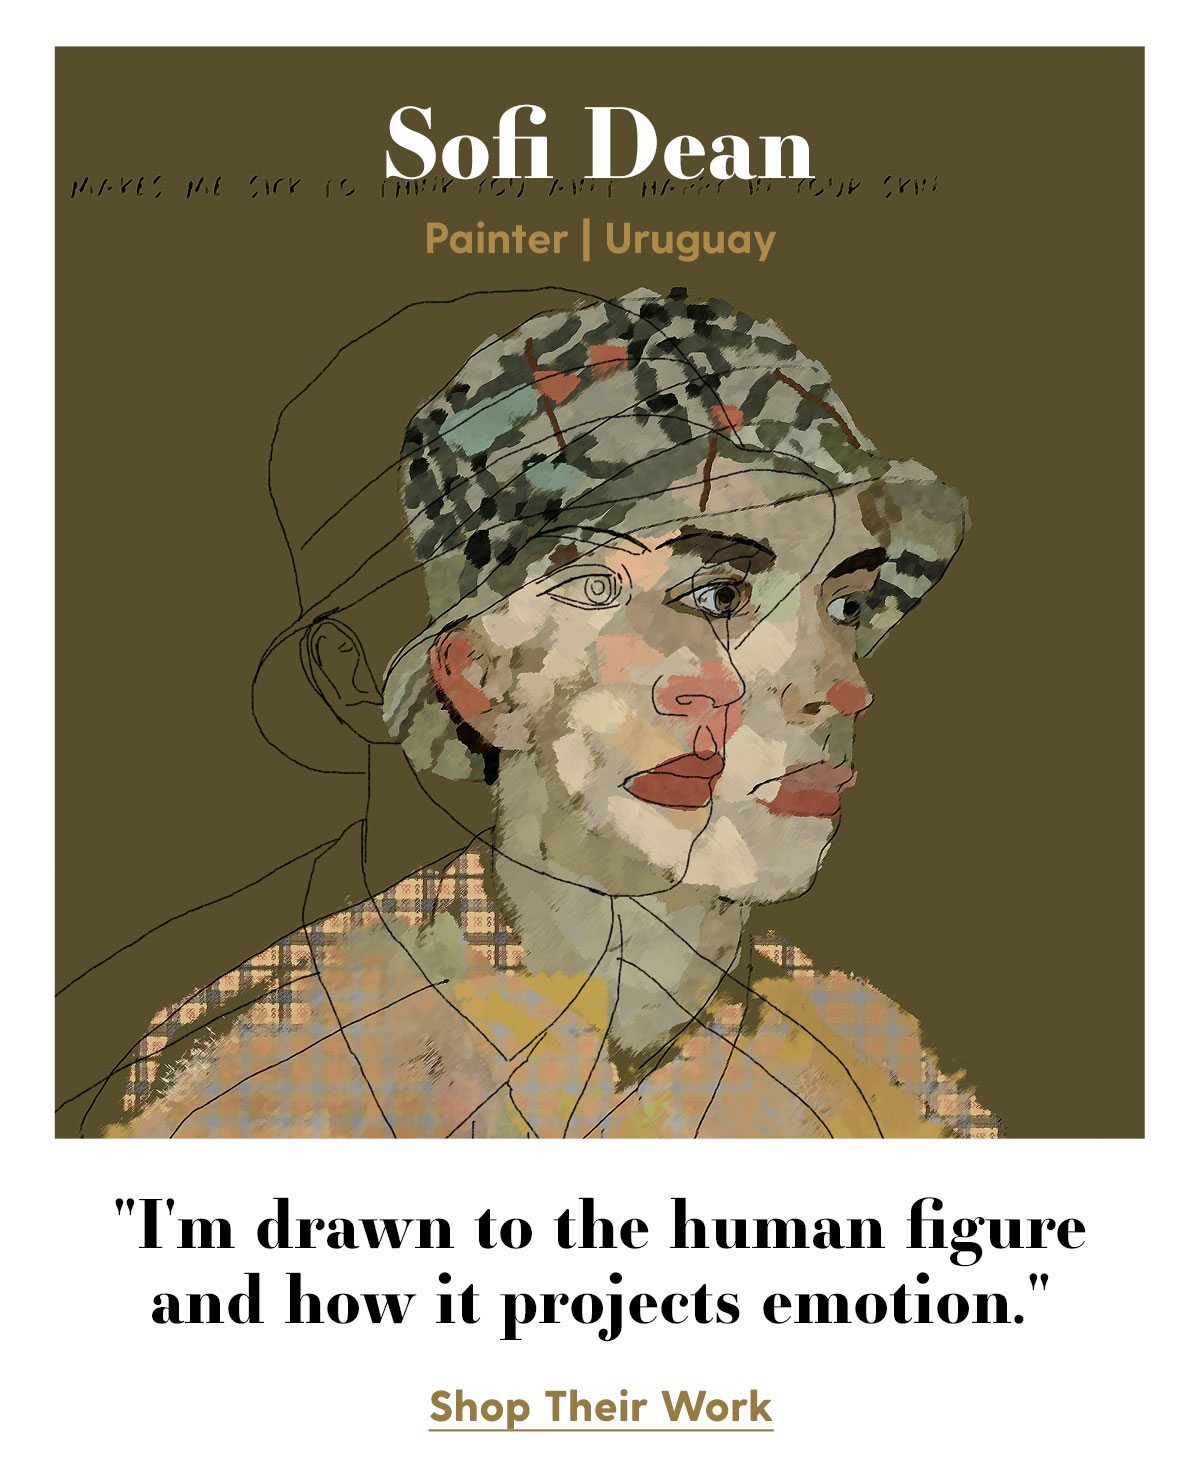 Sofi Dean Painter | Uruguay 'I'm drawn to the human figure and how it projects emotion.' Shop Their Work